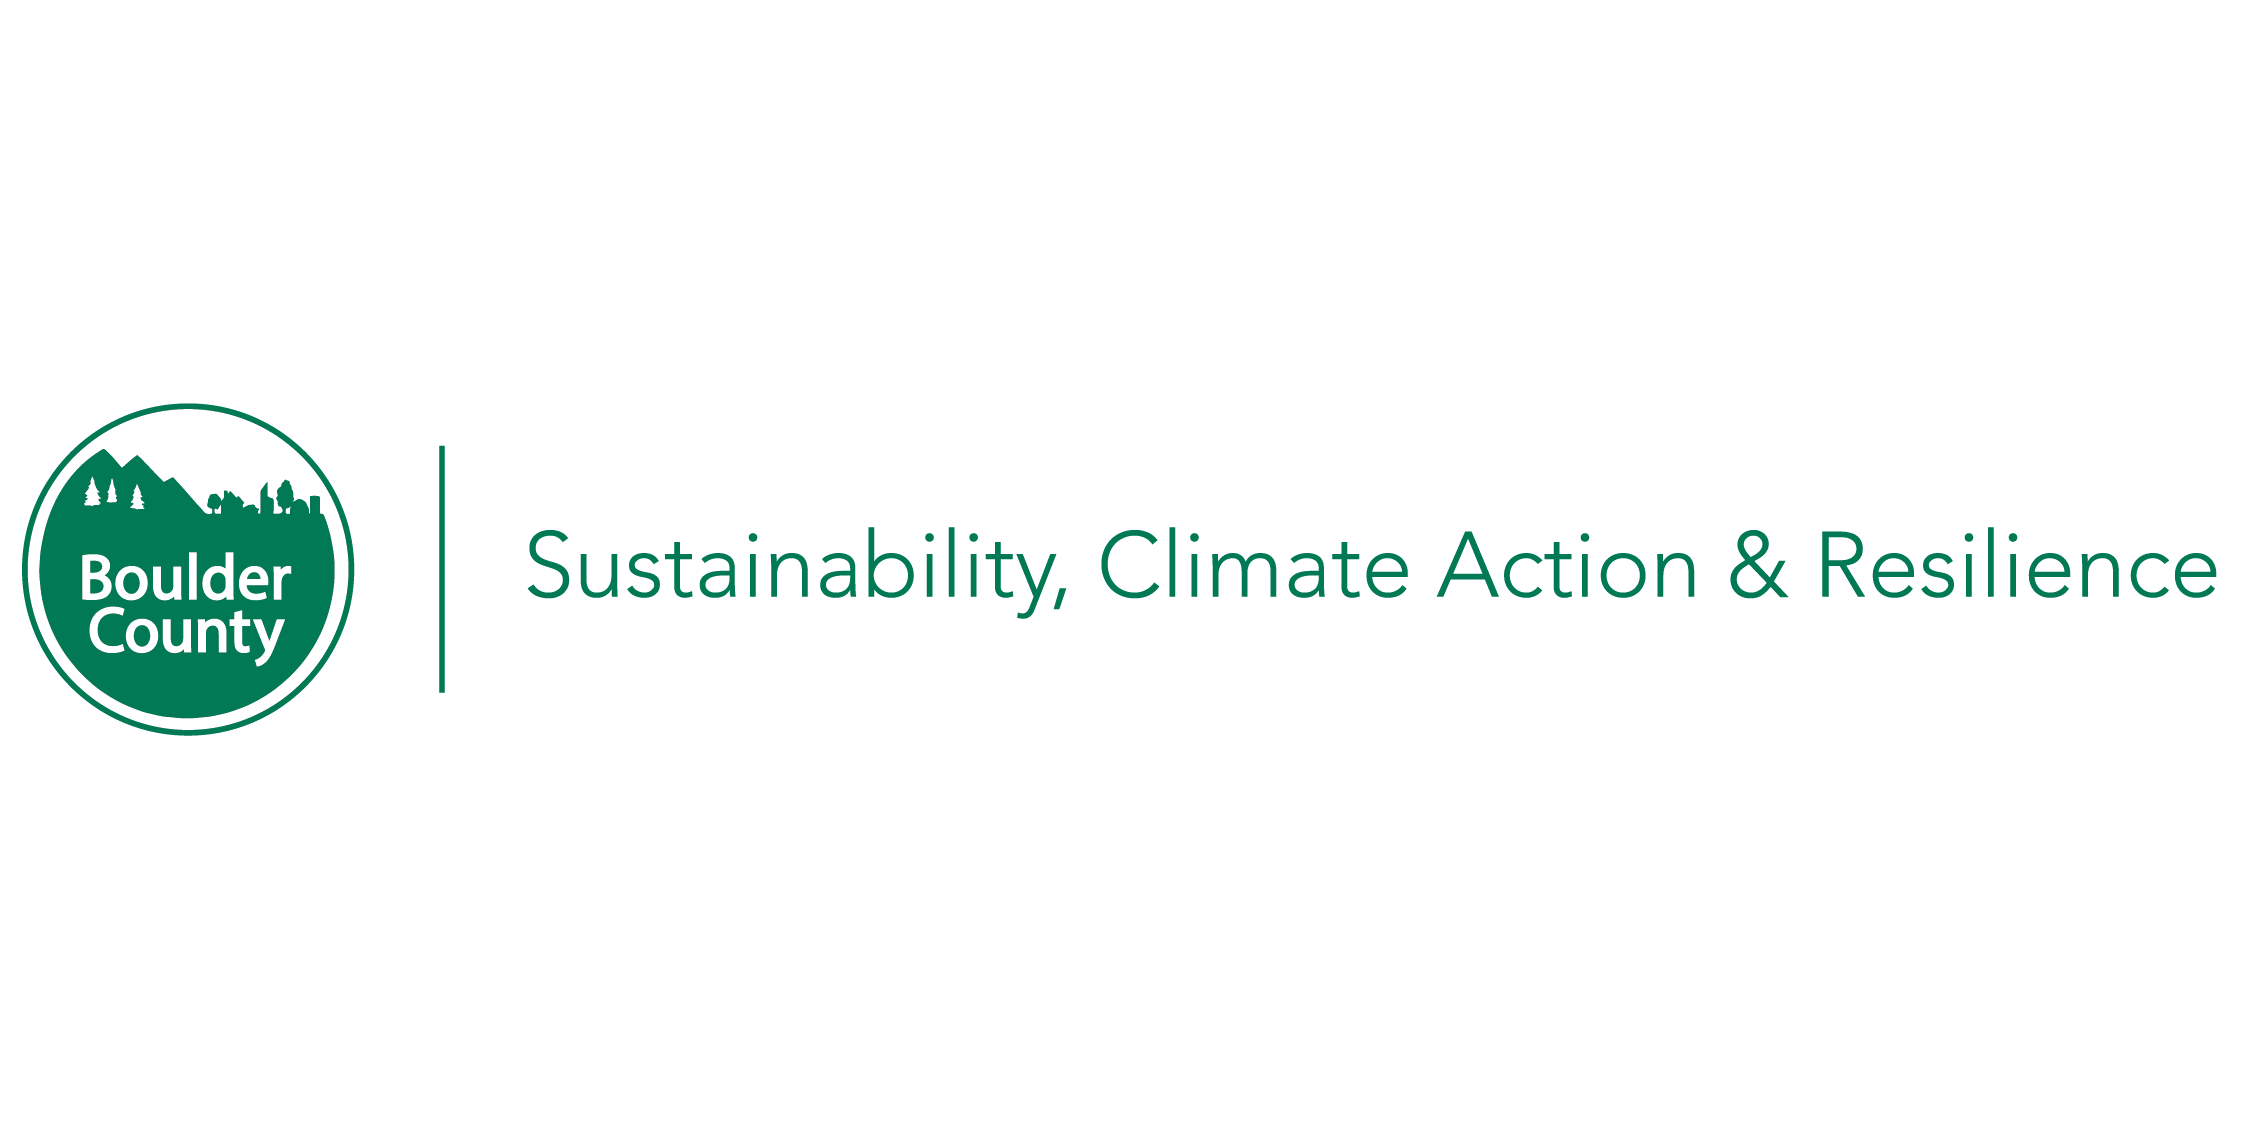 Boulder County Office of Sustainability, Climate Action & Resilience